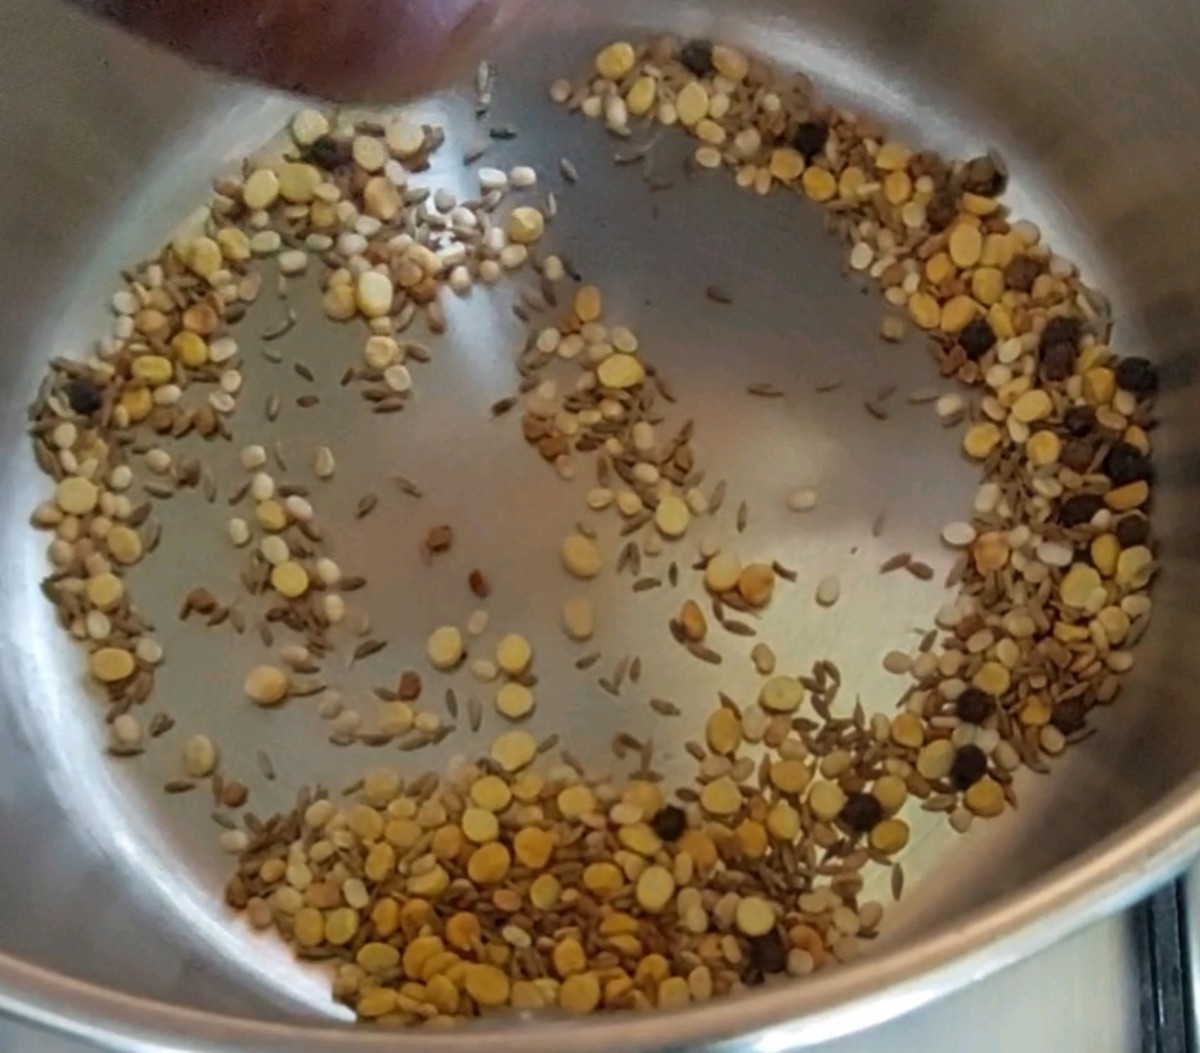 Dry-fry till the lentils turn brown and aromatic. Transfer to a plate or bowl.